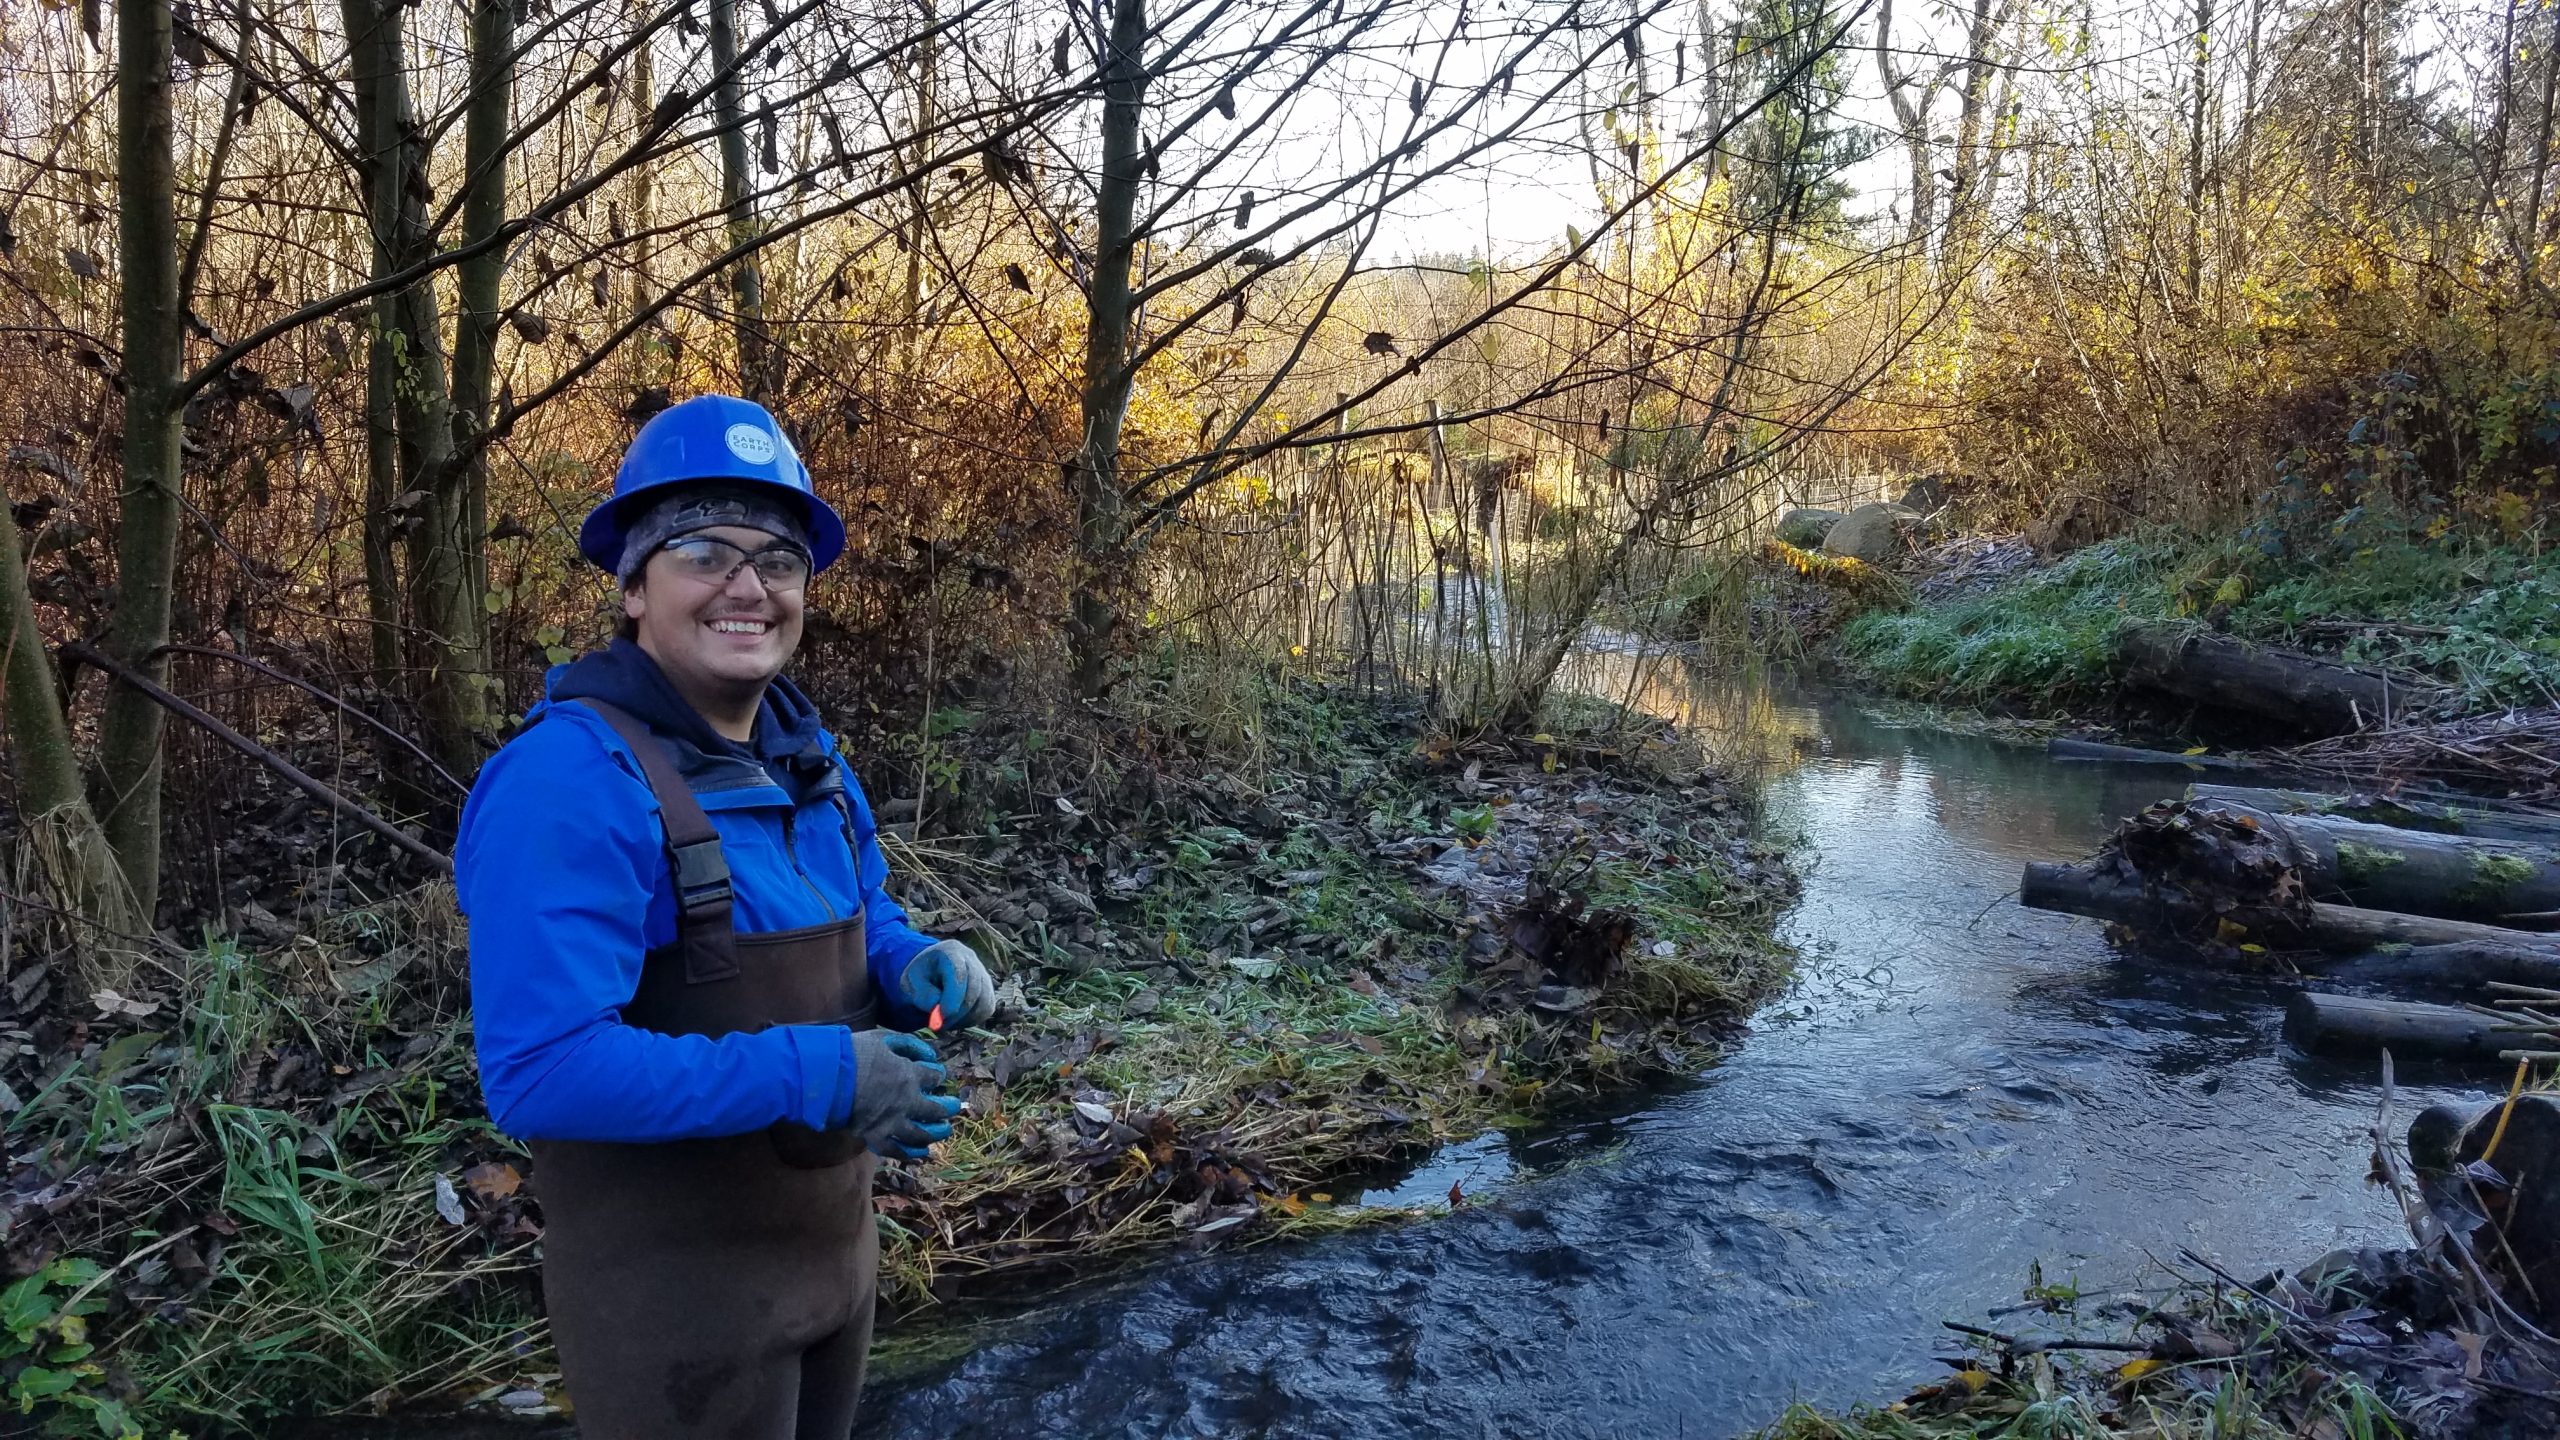 Smiling Corps Member wearing a hard hat and waders, standing in front of a small flowing body of water in a forested area.